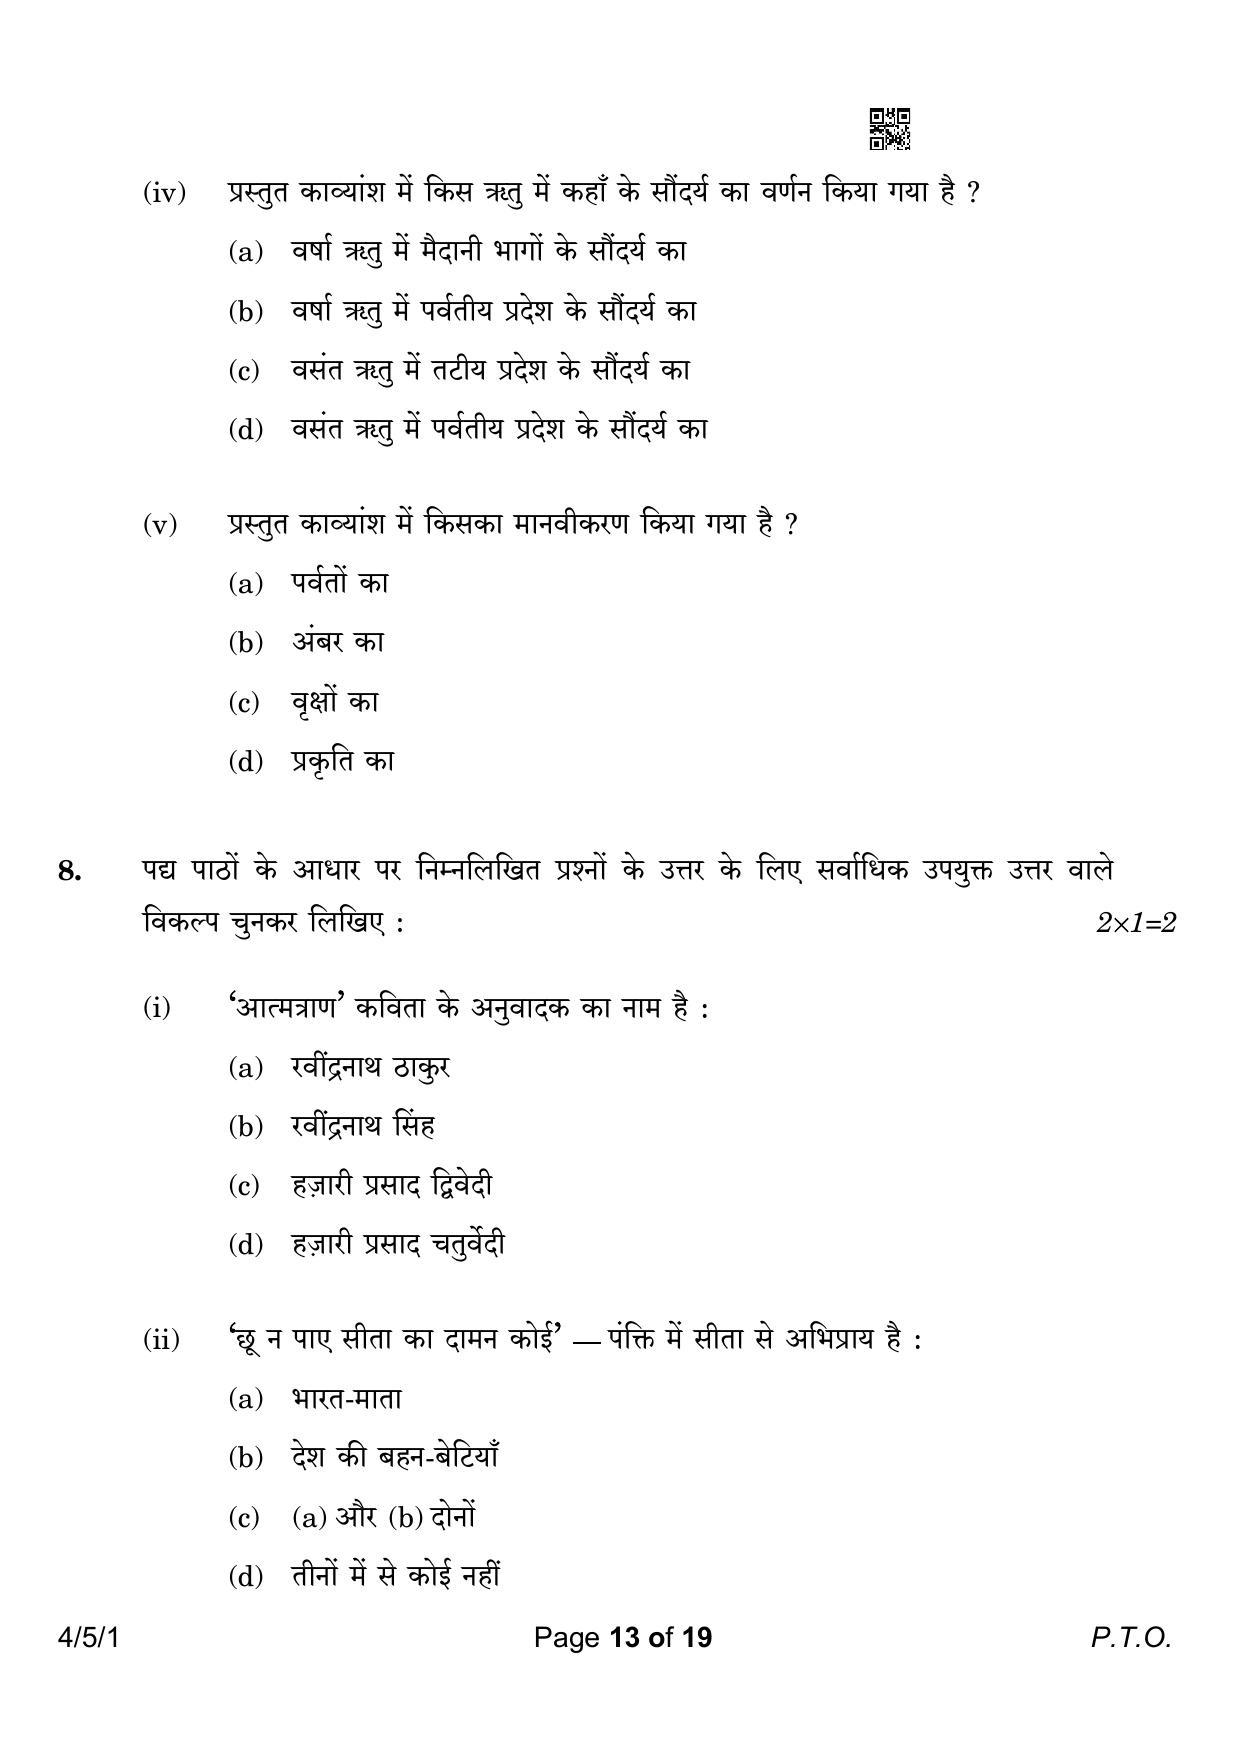 CBSE Class 10 4-5-1 Hindi B 2023 Question Paper - Page 13